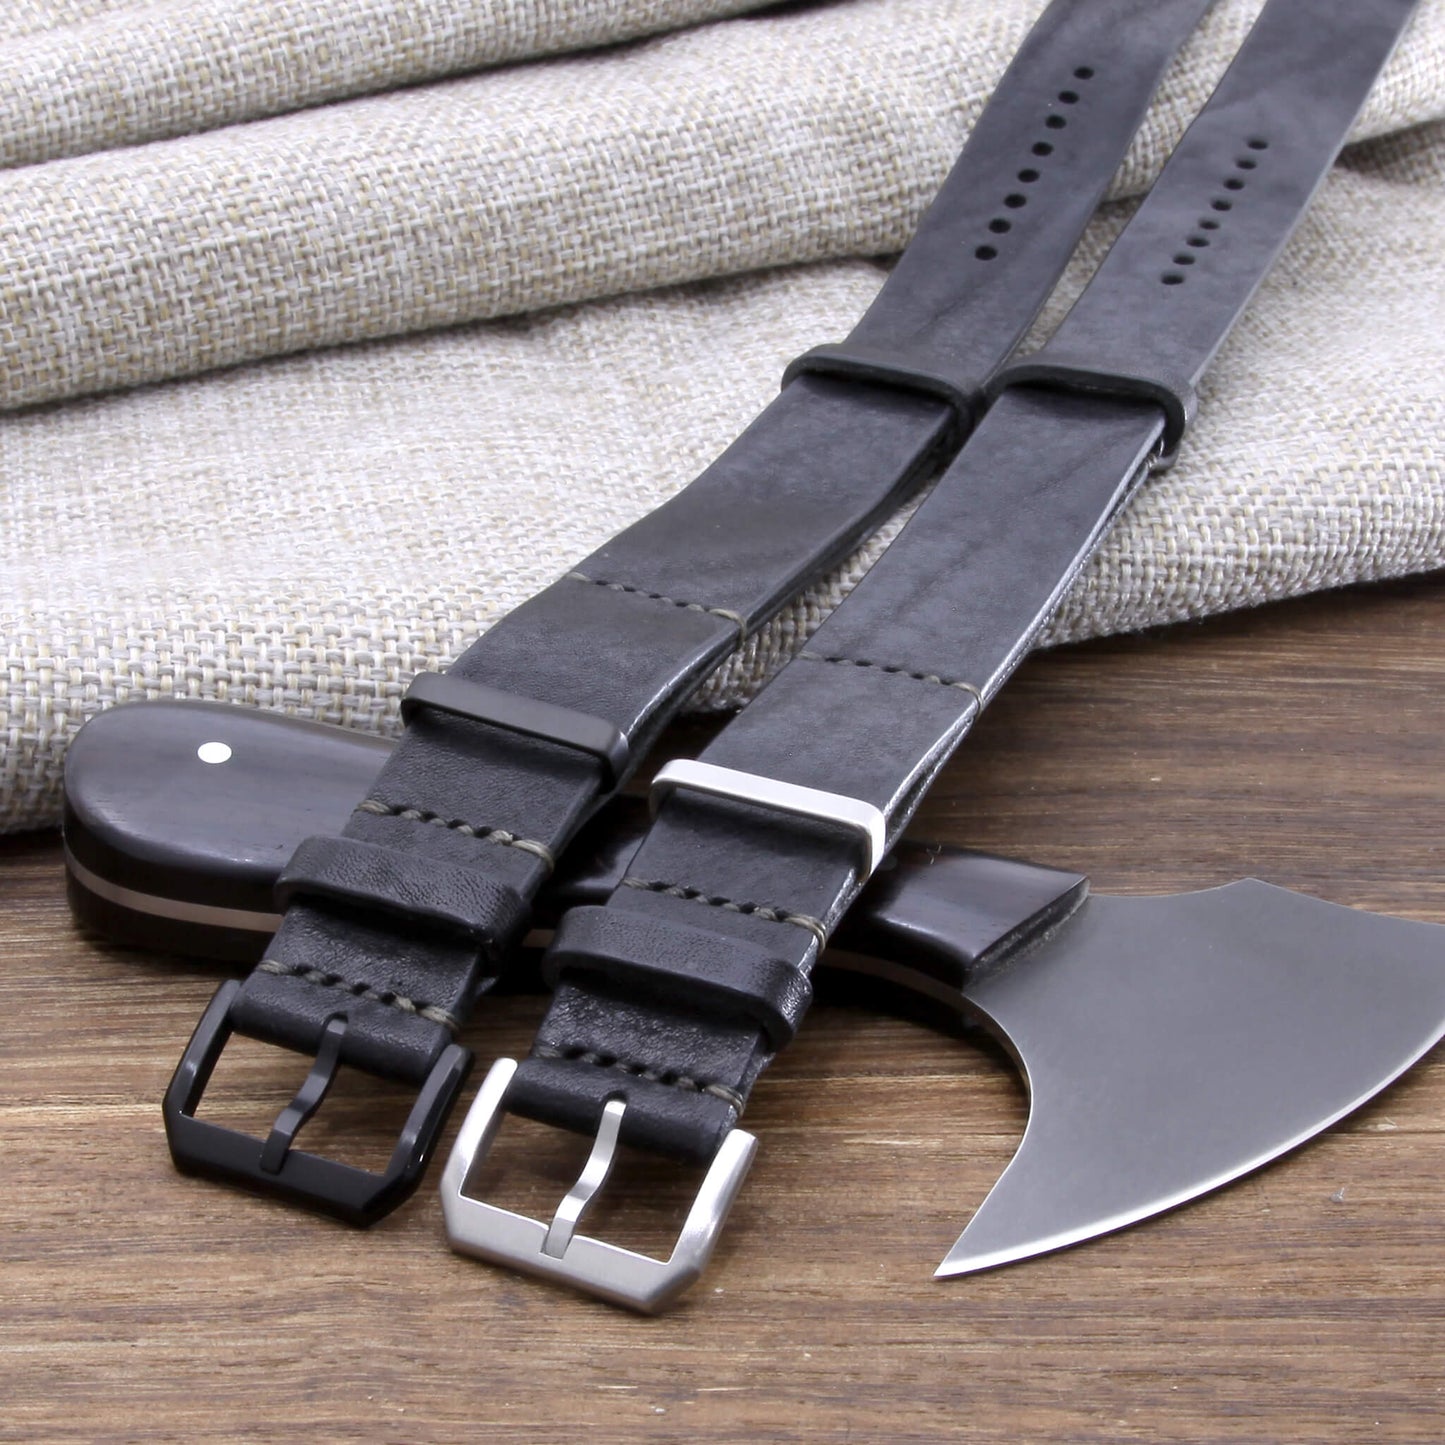  NAT2 Stylish Leather Watch Strap, Vintage Nero Black available in brush steel and black PVD buckle, made with full grain Italian veg-tanned leather by Cozy Handmade